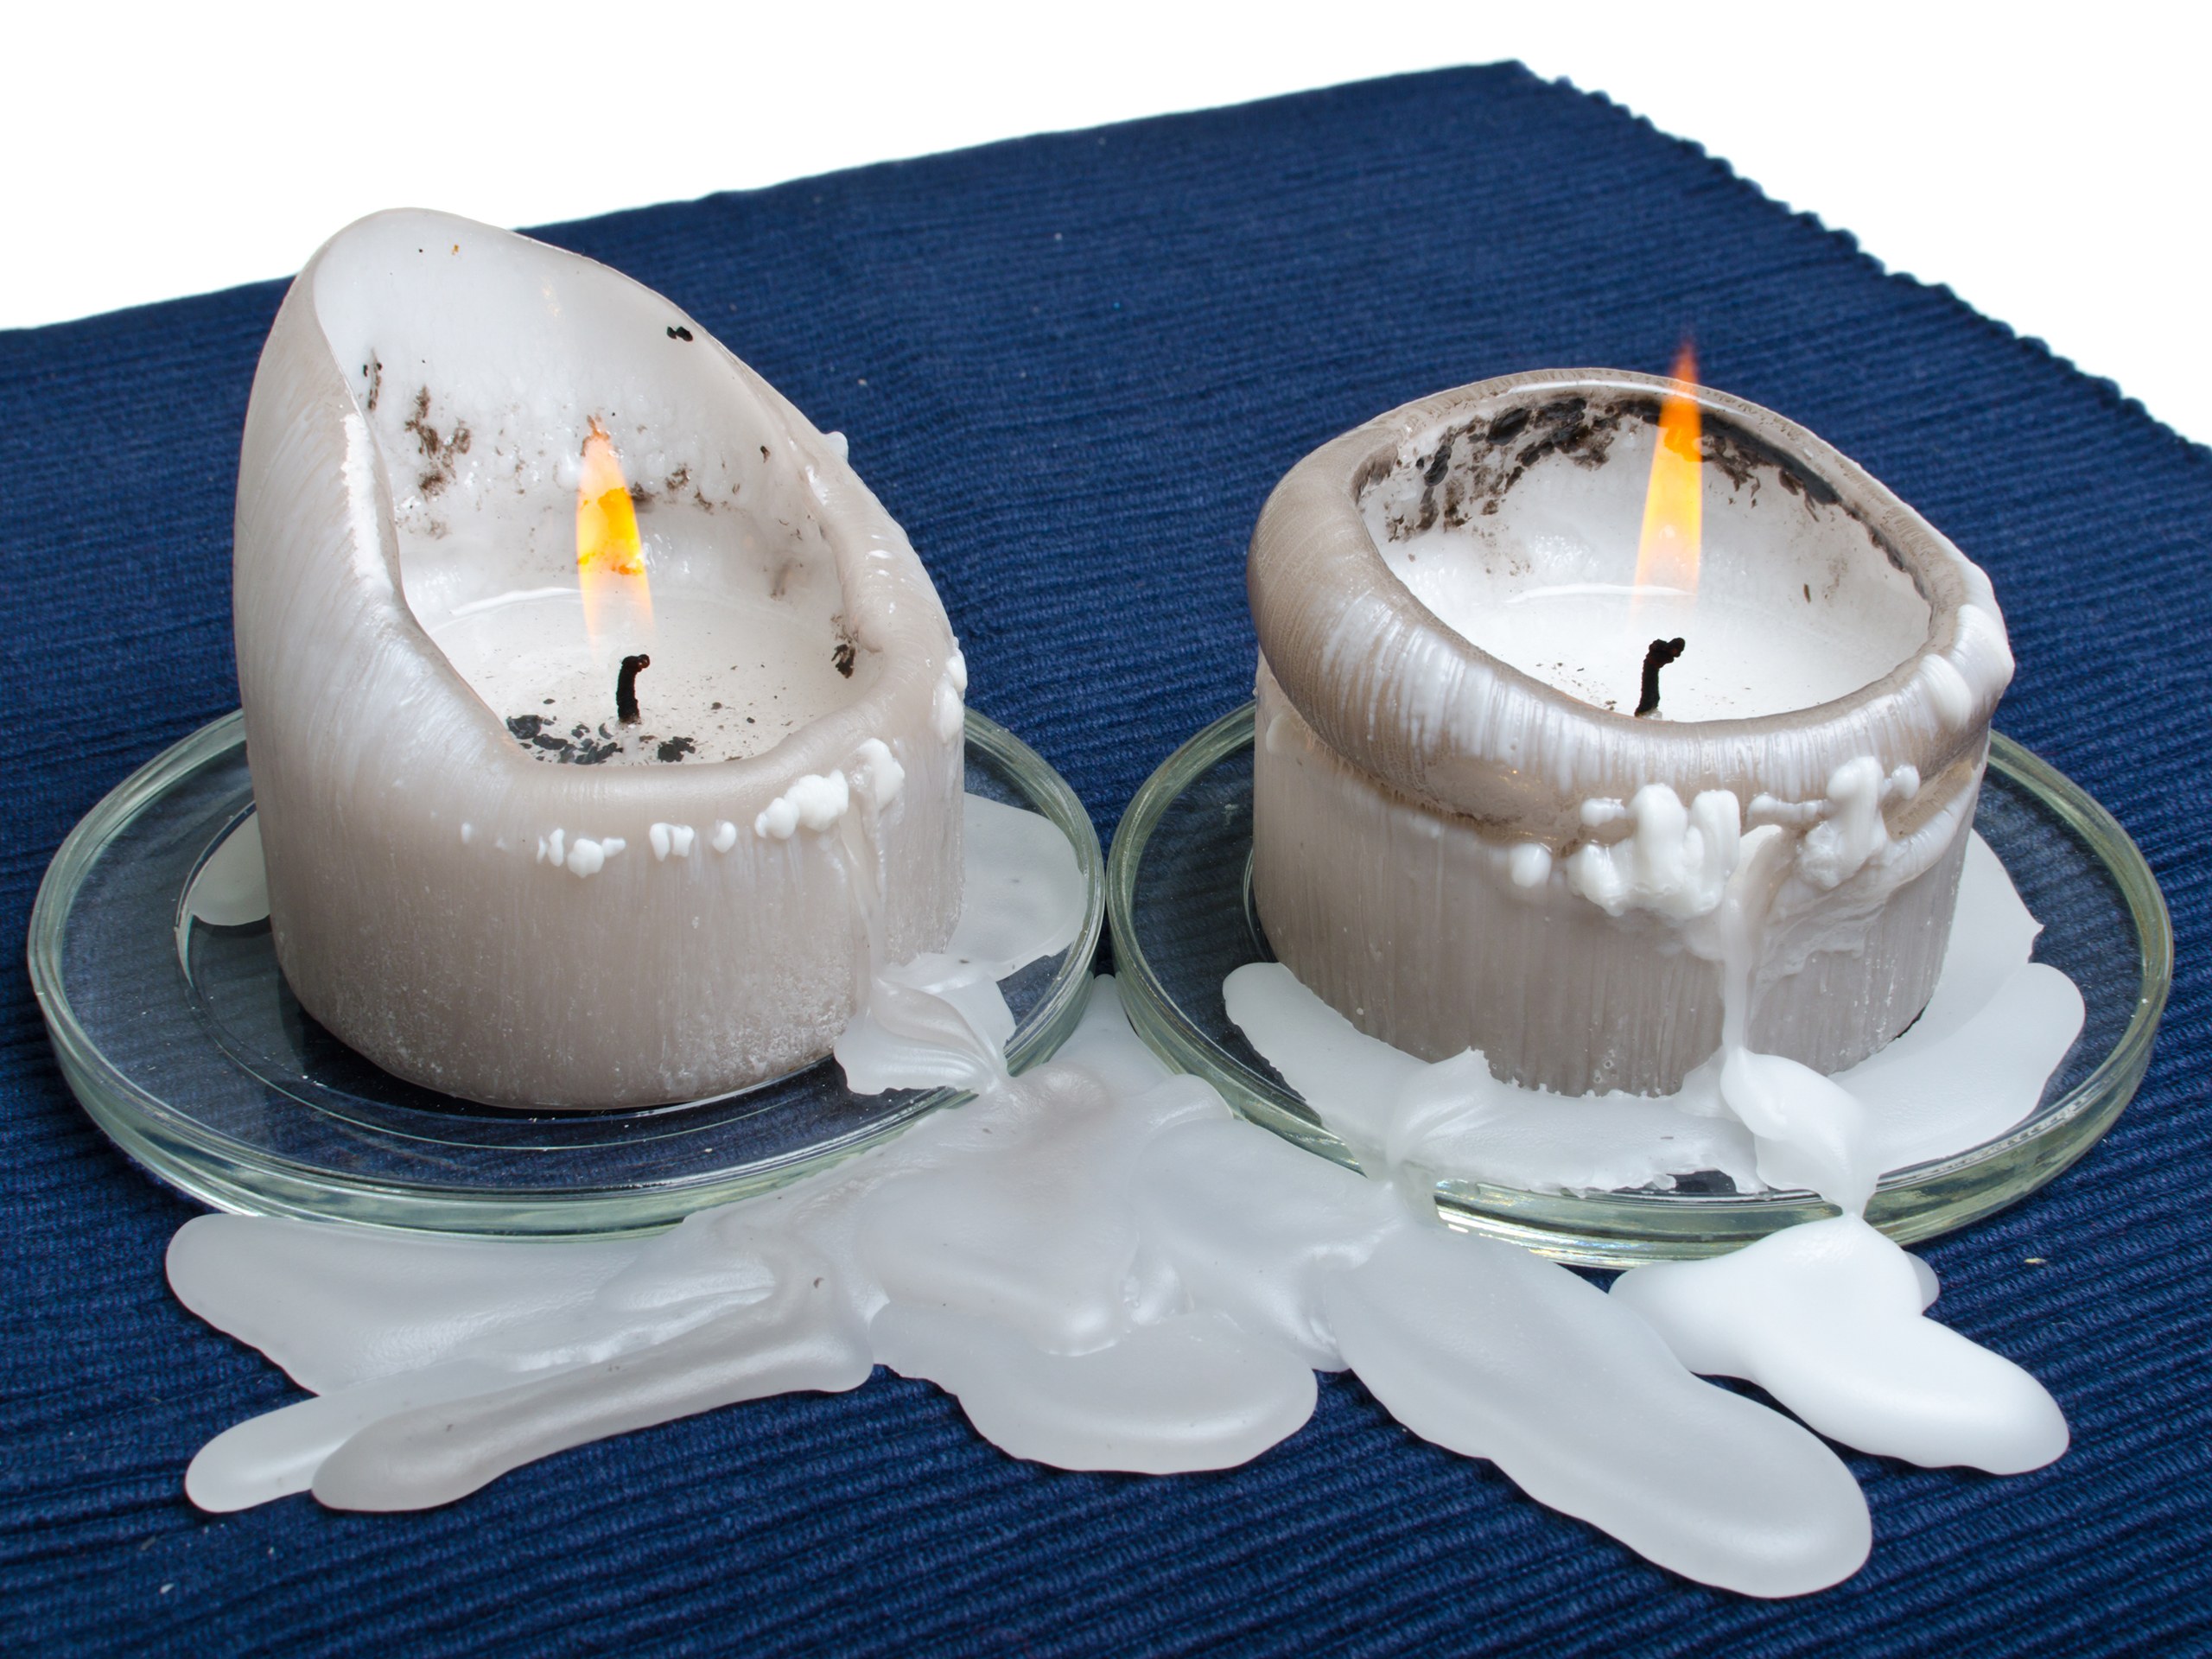 How to Remove Candle Wax from Fabric, Floors, Glass and More